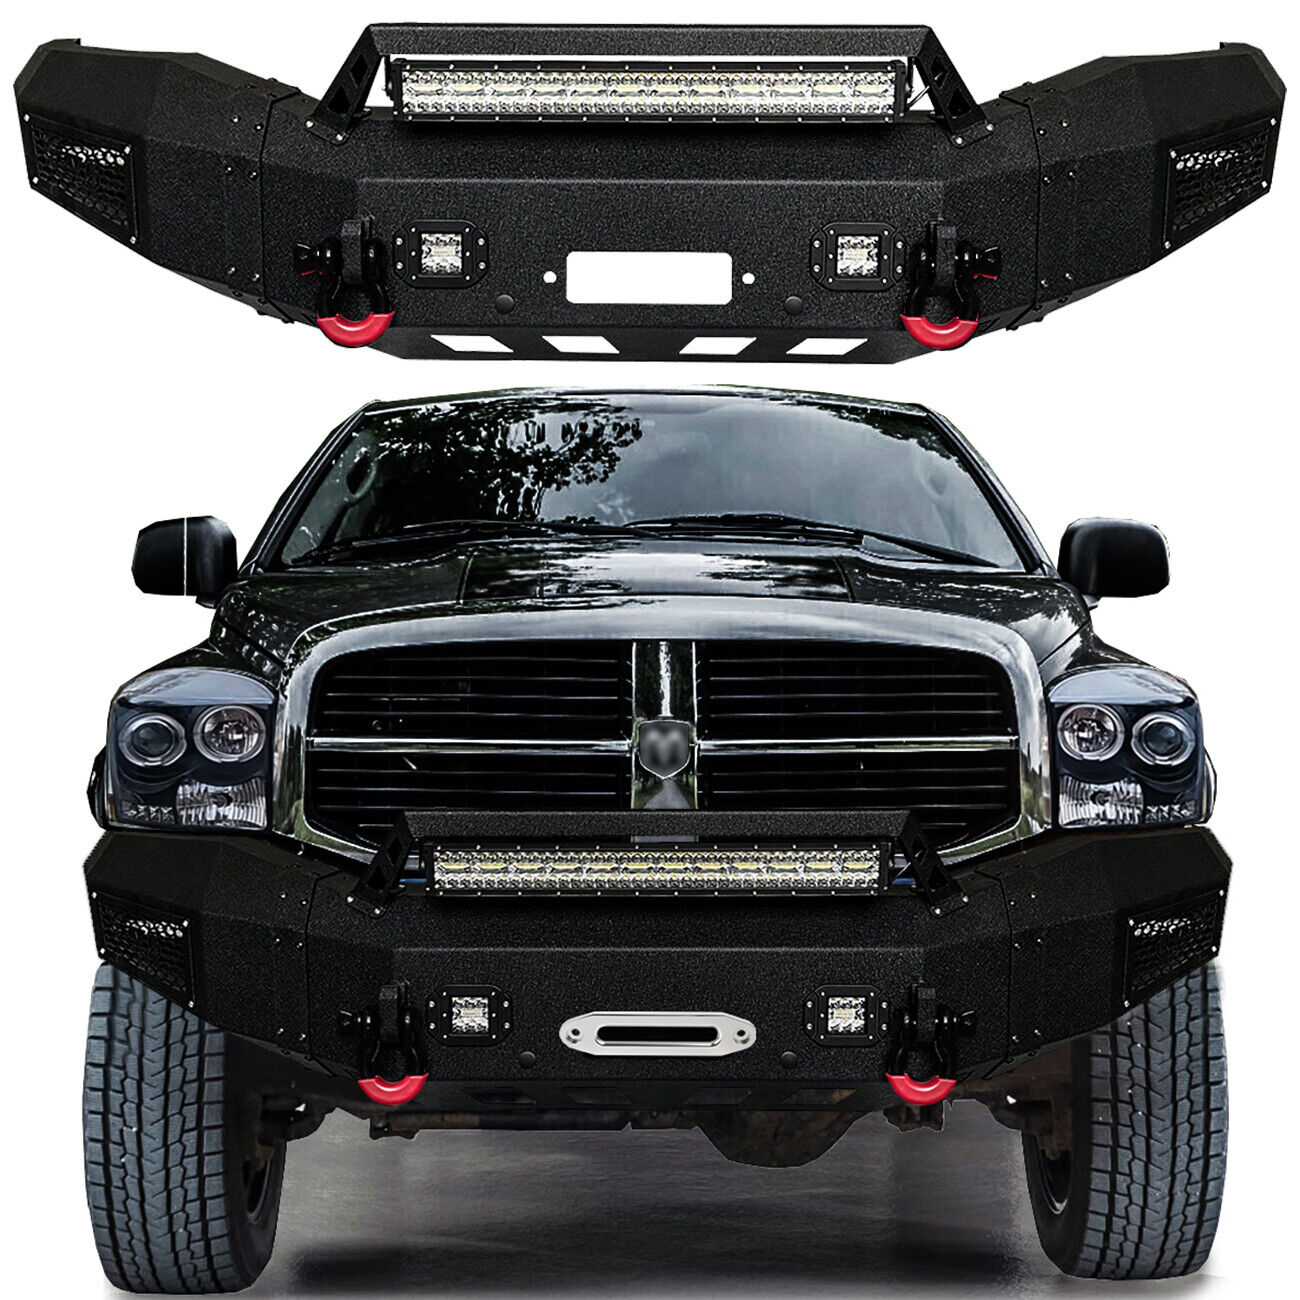 Vijay For 2006-2009 Dodge Ram 2500 3500 Front or Rear Bumper with LED Lights